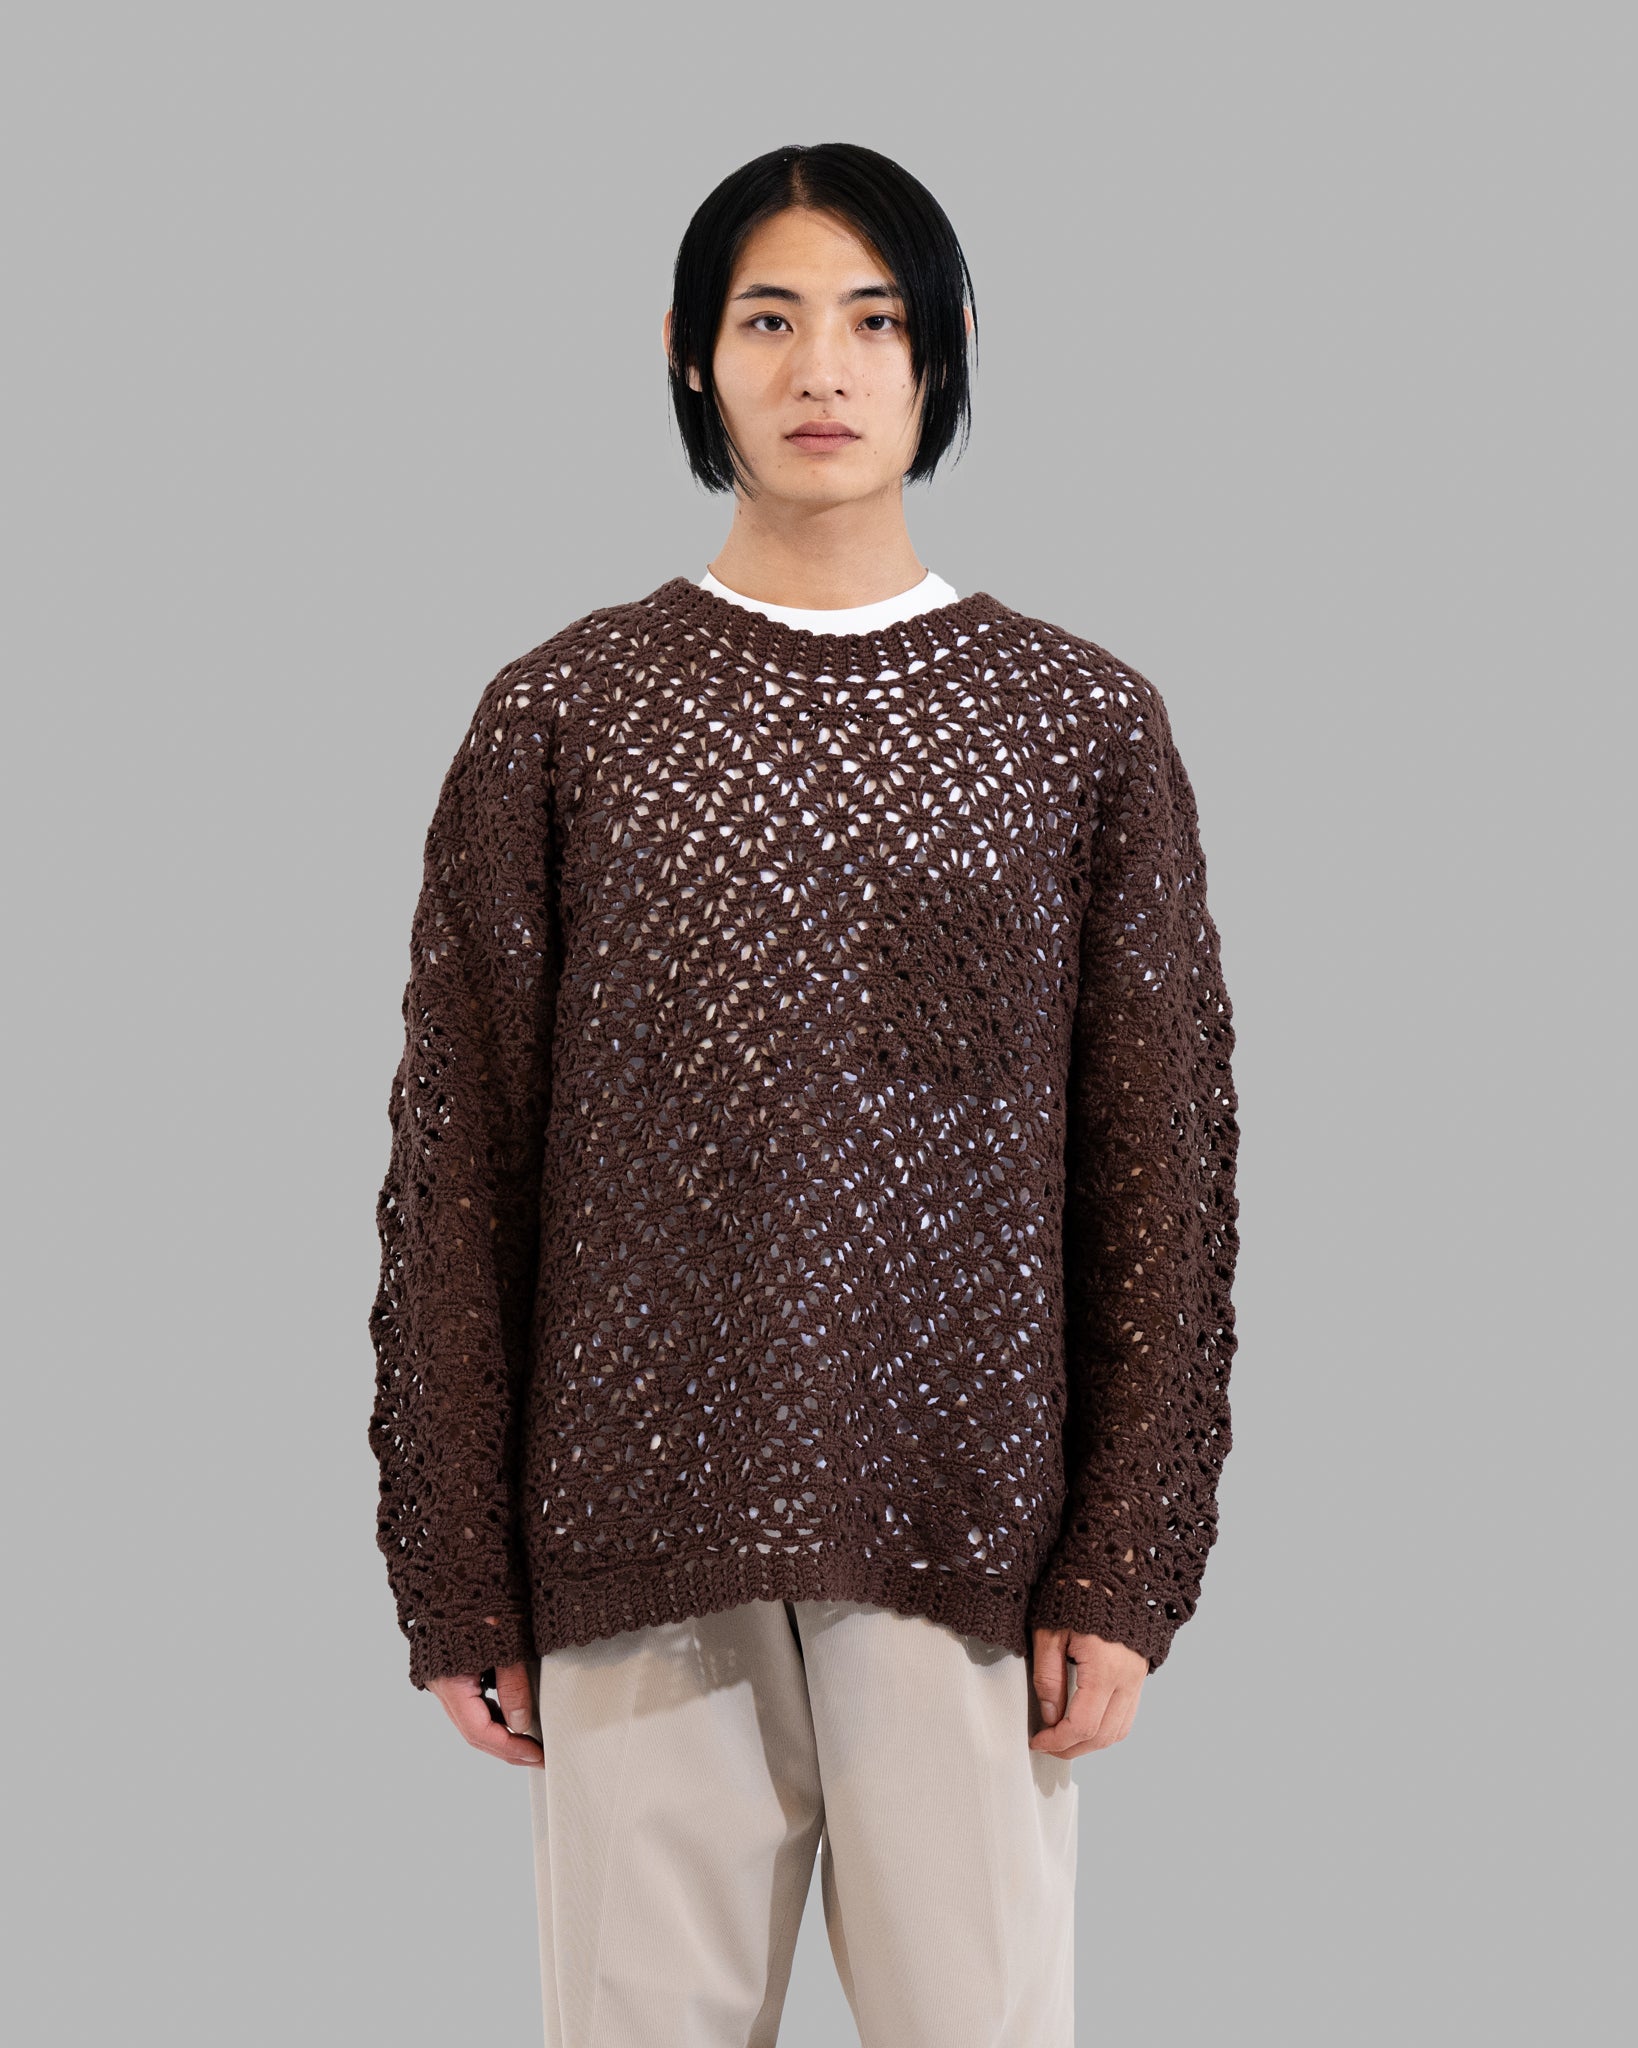 Crochet Hand Knit Pullover Sweater -Coffee